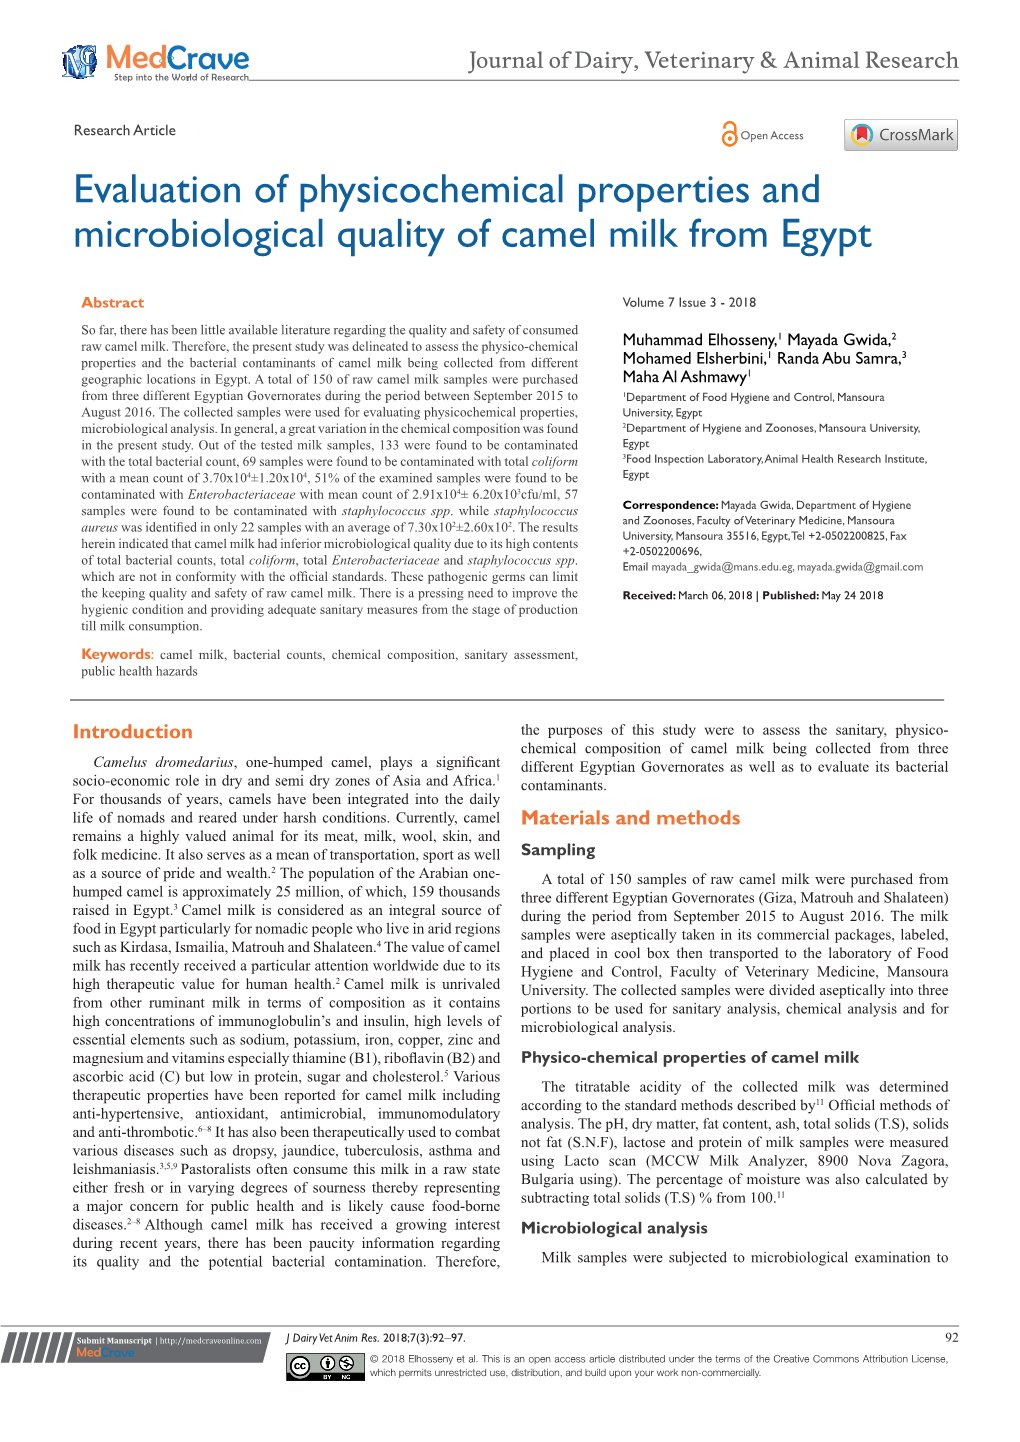 Evaluation of Physicochemical Properties and Microbiological Quality of Camel Milk from Egypt